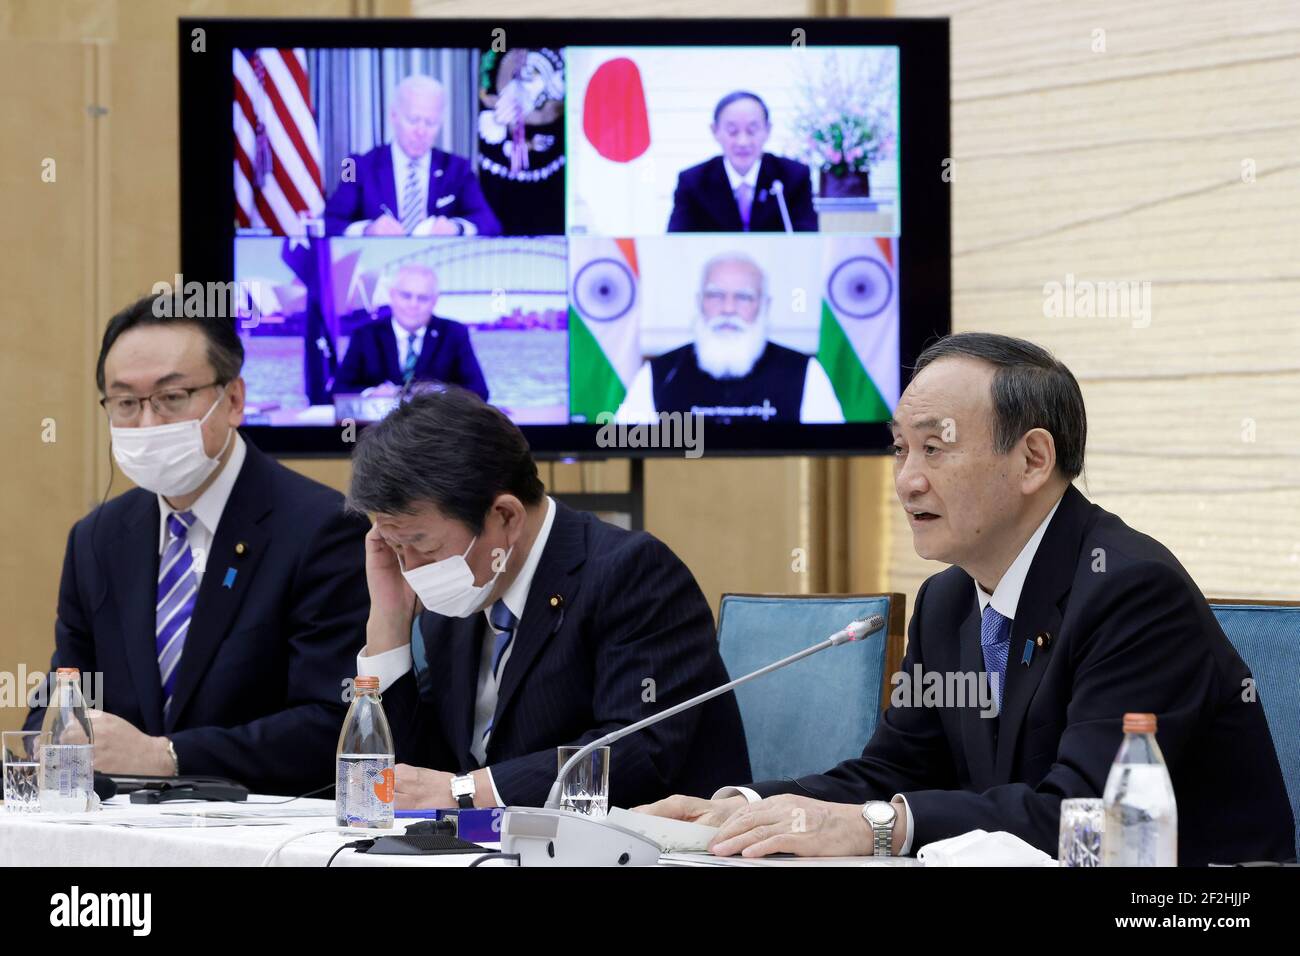 Tokyo, Japan. 12th Mar, 2021. Yoshihide Suga (R) Japanese Prime Minister speaks while a monitor displays U.S. President Joe Biden, Scott Morrison, Australia's Prime Minister, and Narendra Modi, India's Prime Minister, during the Virtual Quadrilateral Security Dialogue (Quad) meeting at his official residence in Tokyo, Japan, on Friday, March 12, 2021. Credit: POOL/ZUMA Wire/Alamy Live News Stock Photo